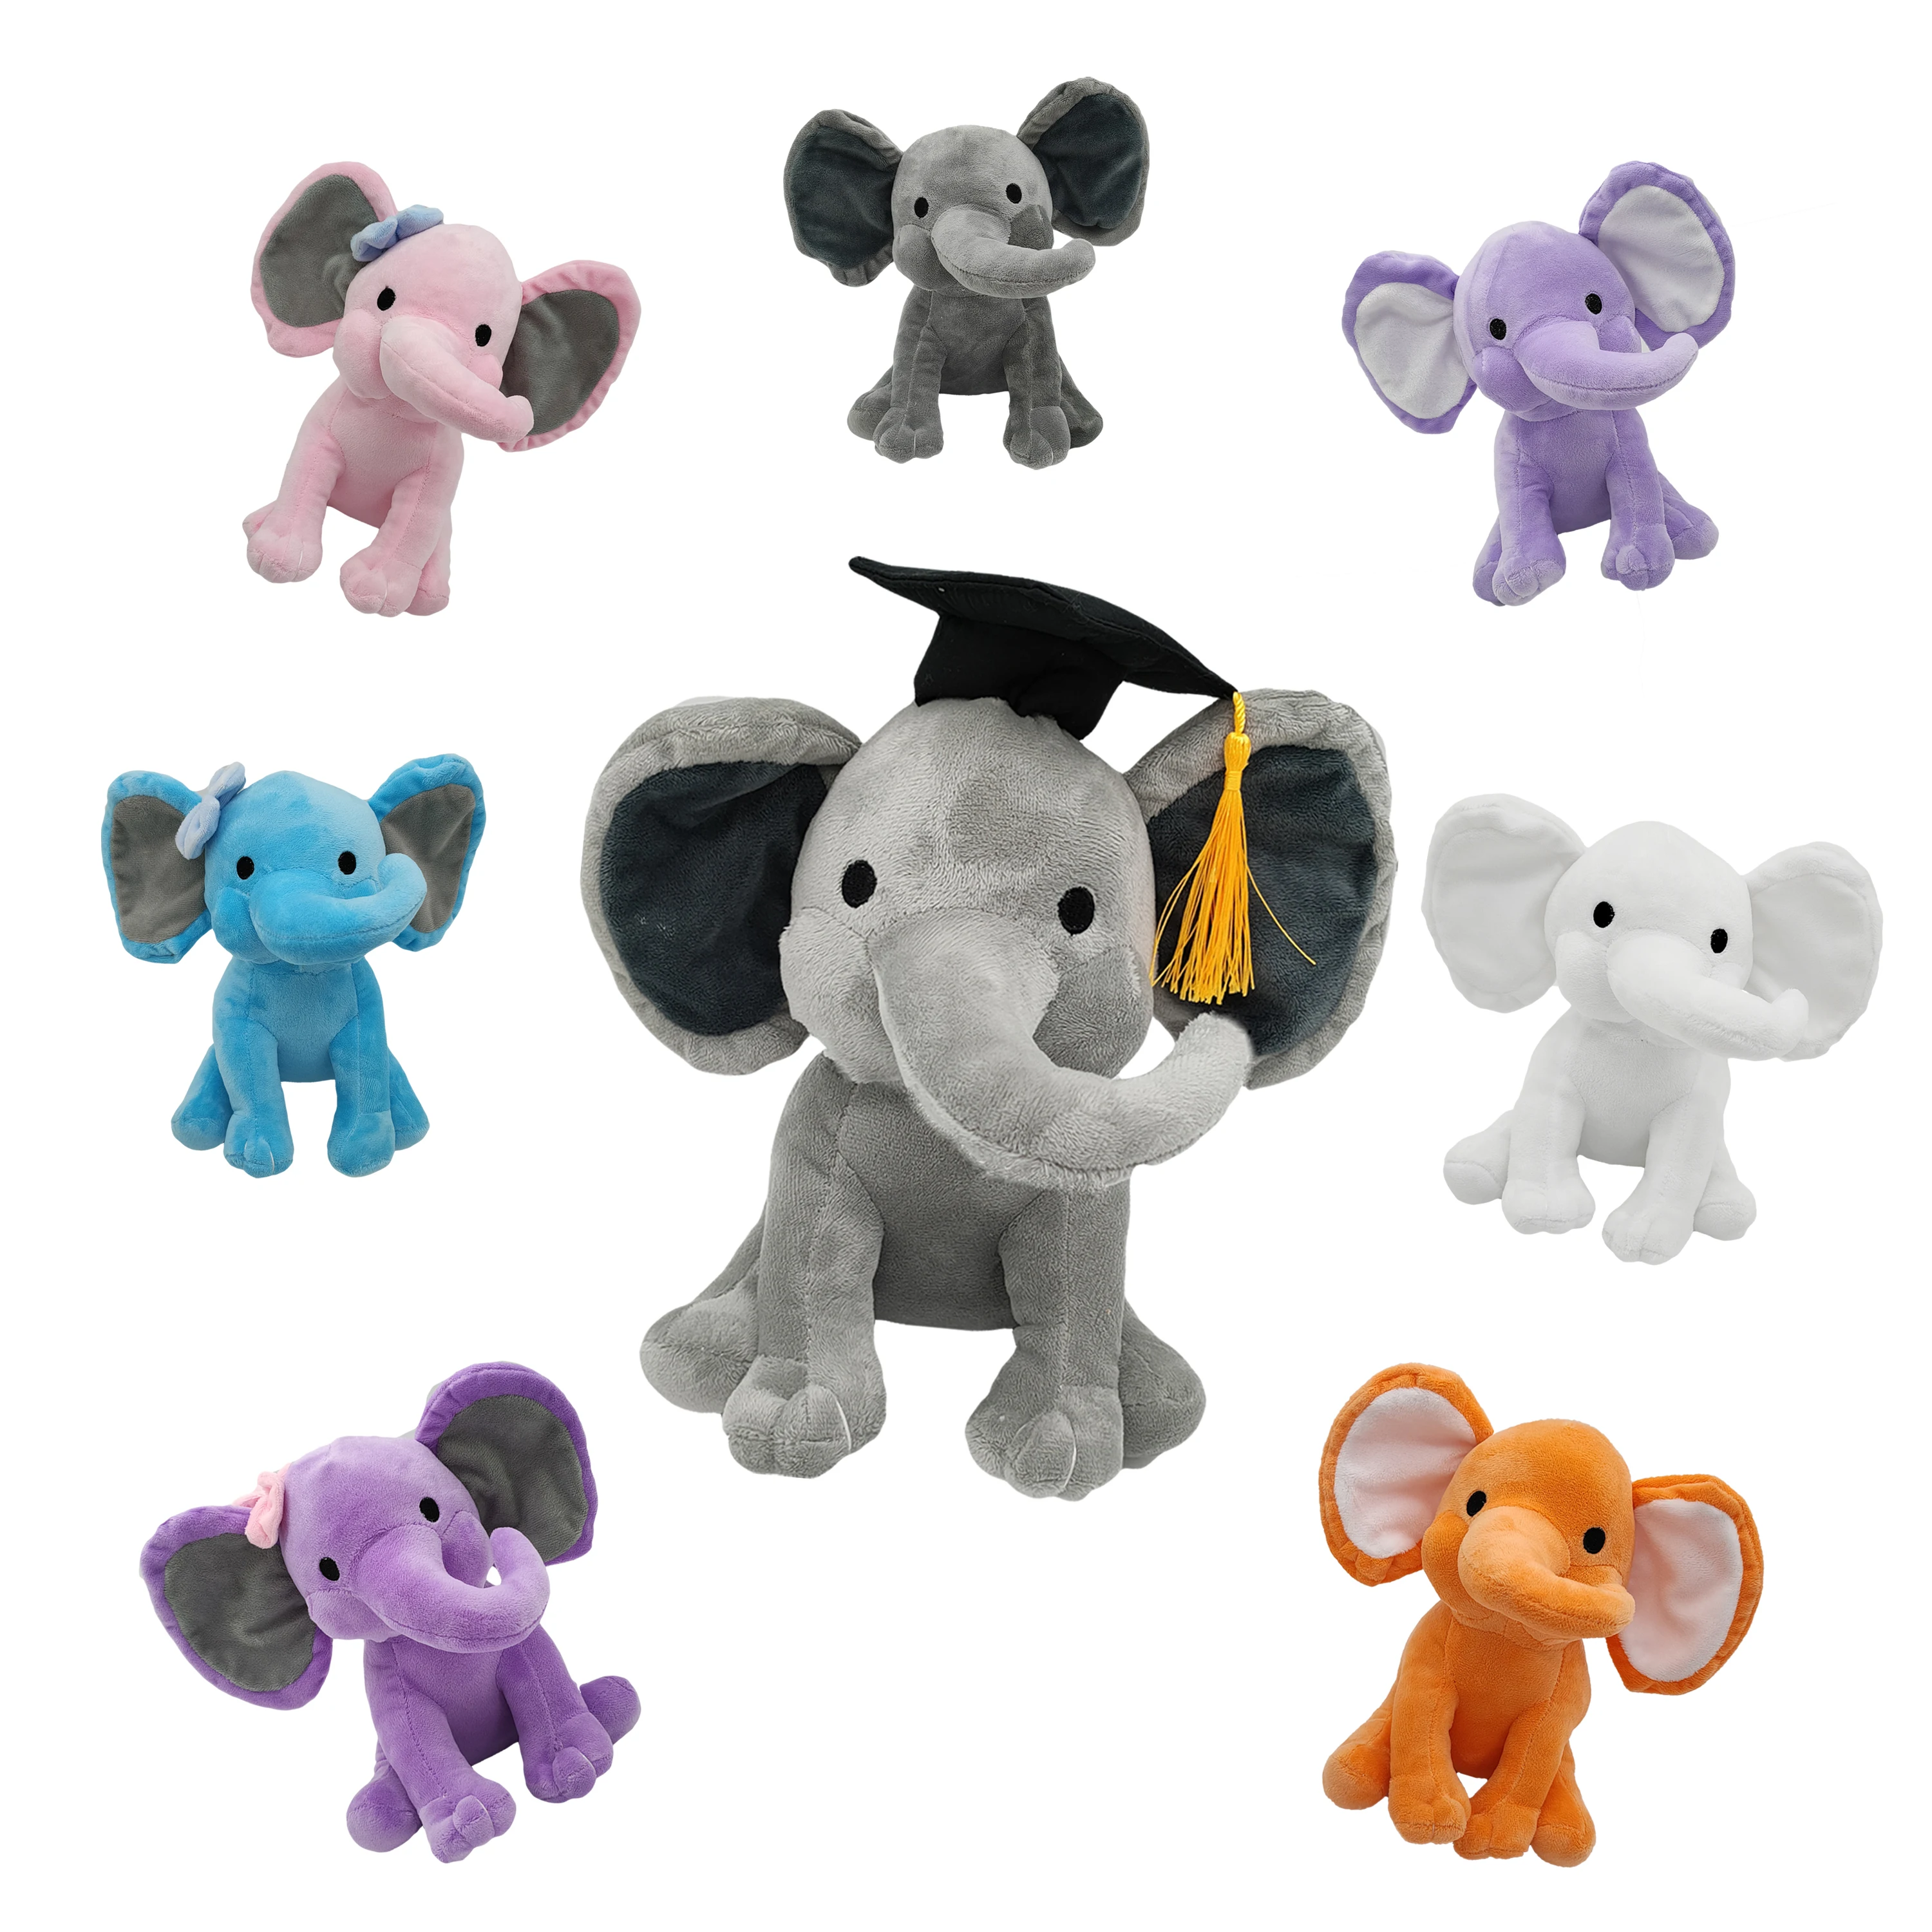 Dropshipping 1pc 25cm Cute Elephant with Doctor Plush Dolls Stuffed Graduation Baby Elephant Soft Toy for Girls Children Gifts